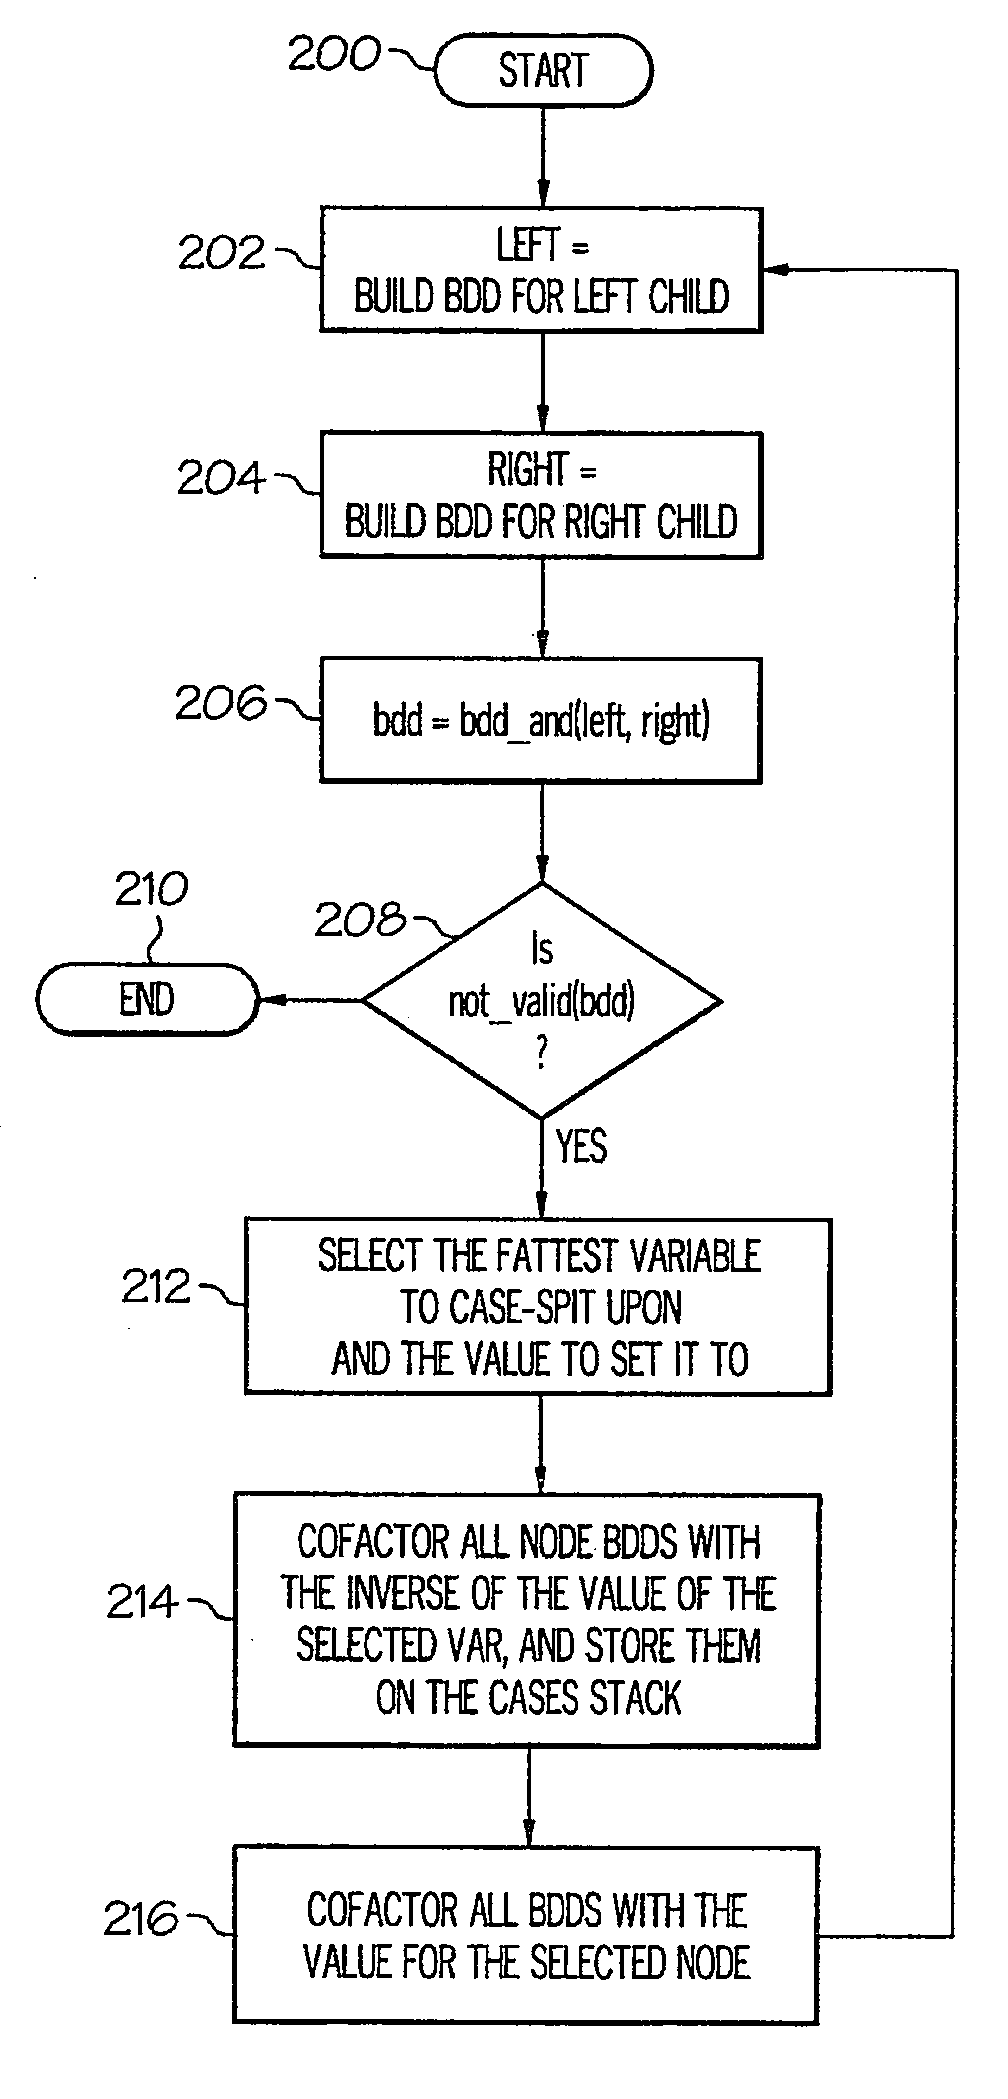 Method and system for case-splitting on nodes in a symbolic simulation framework